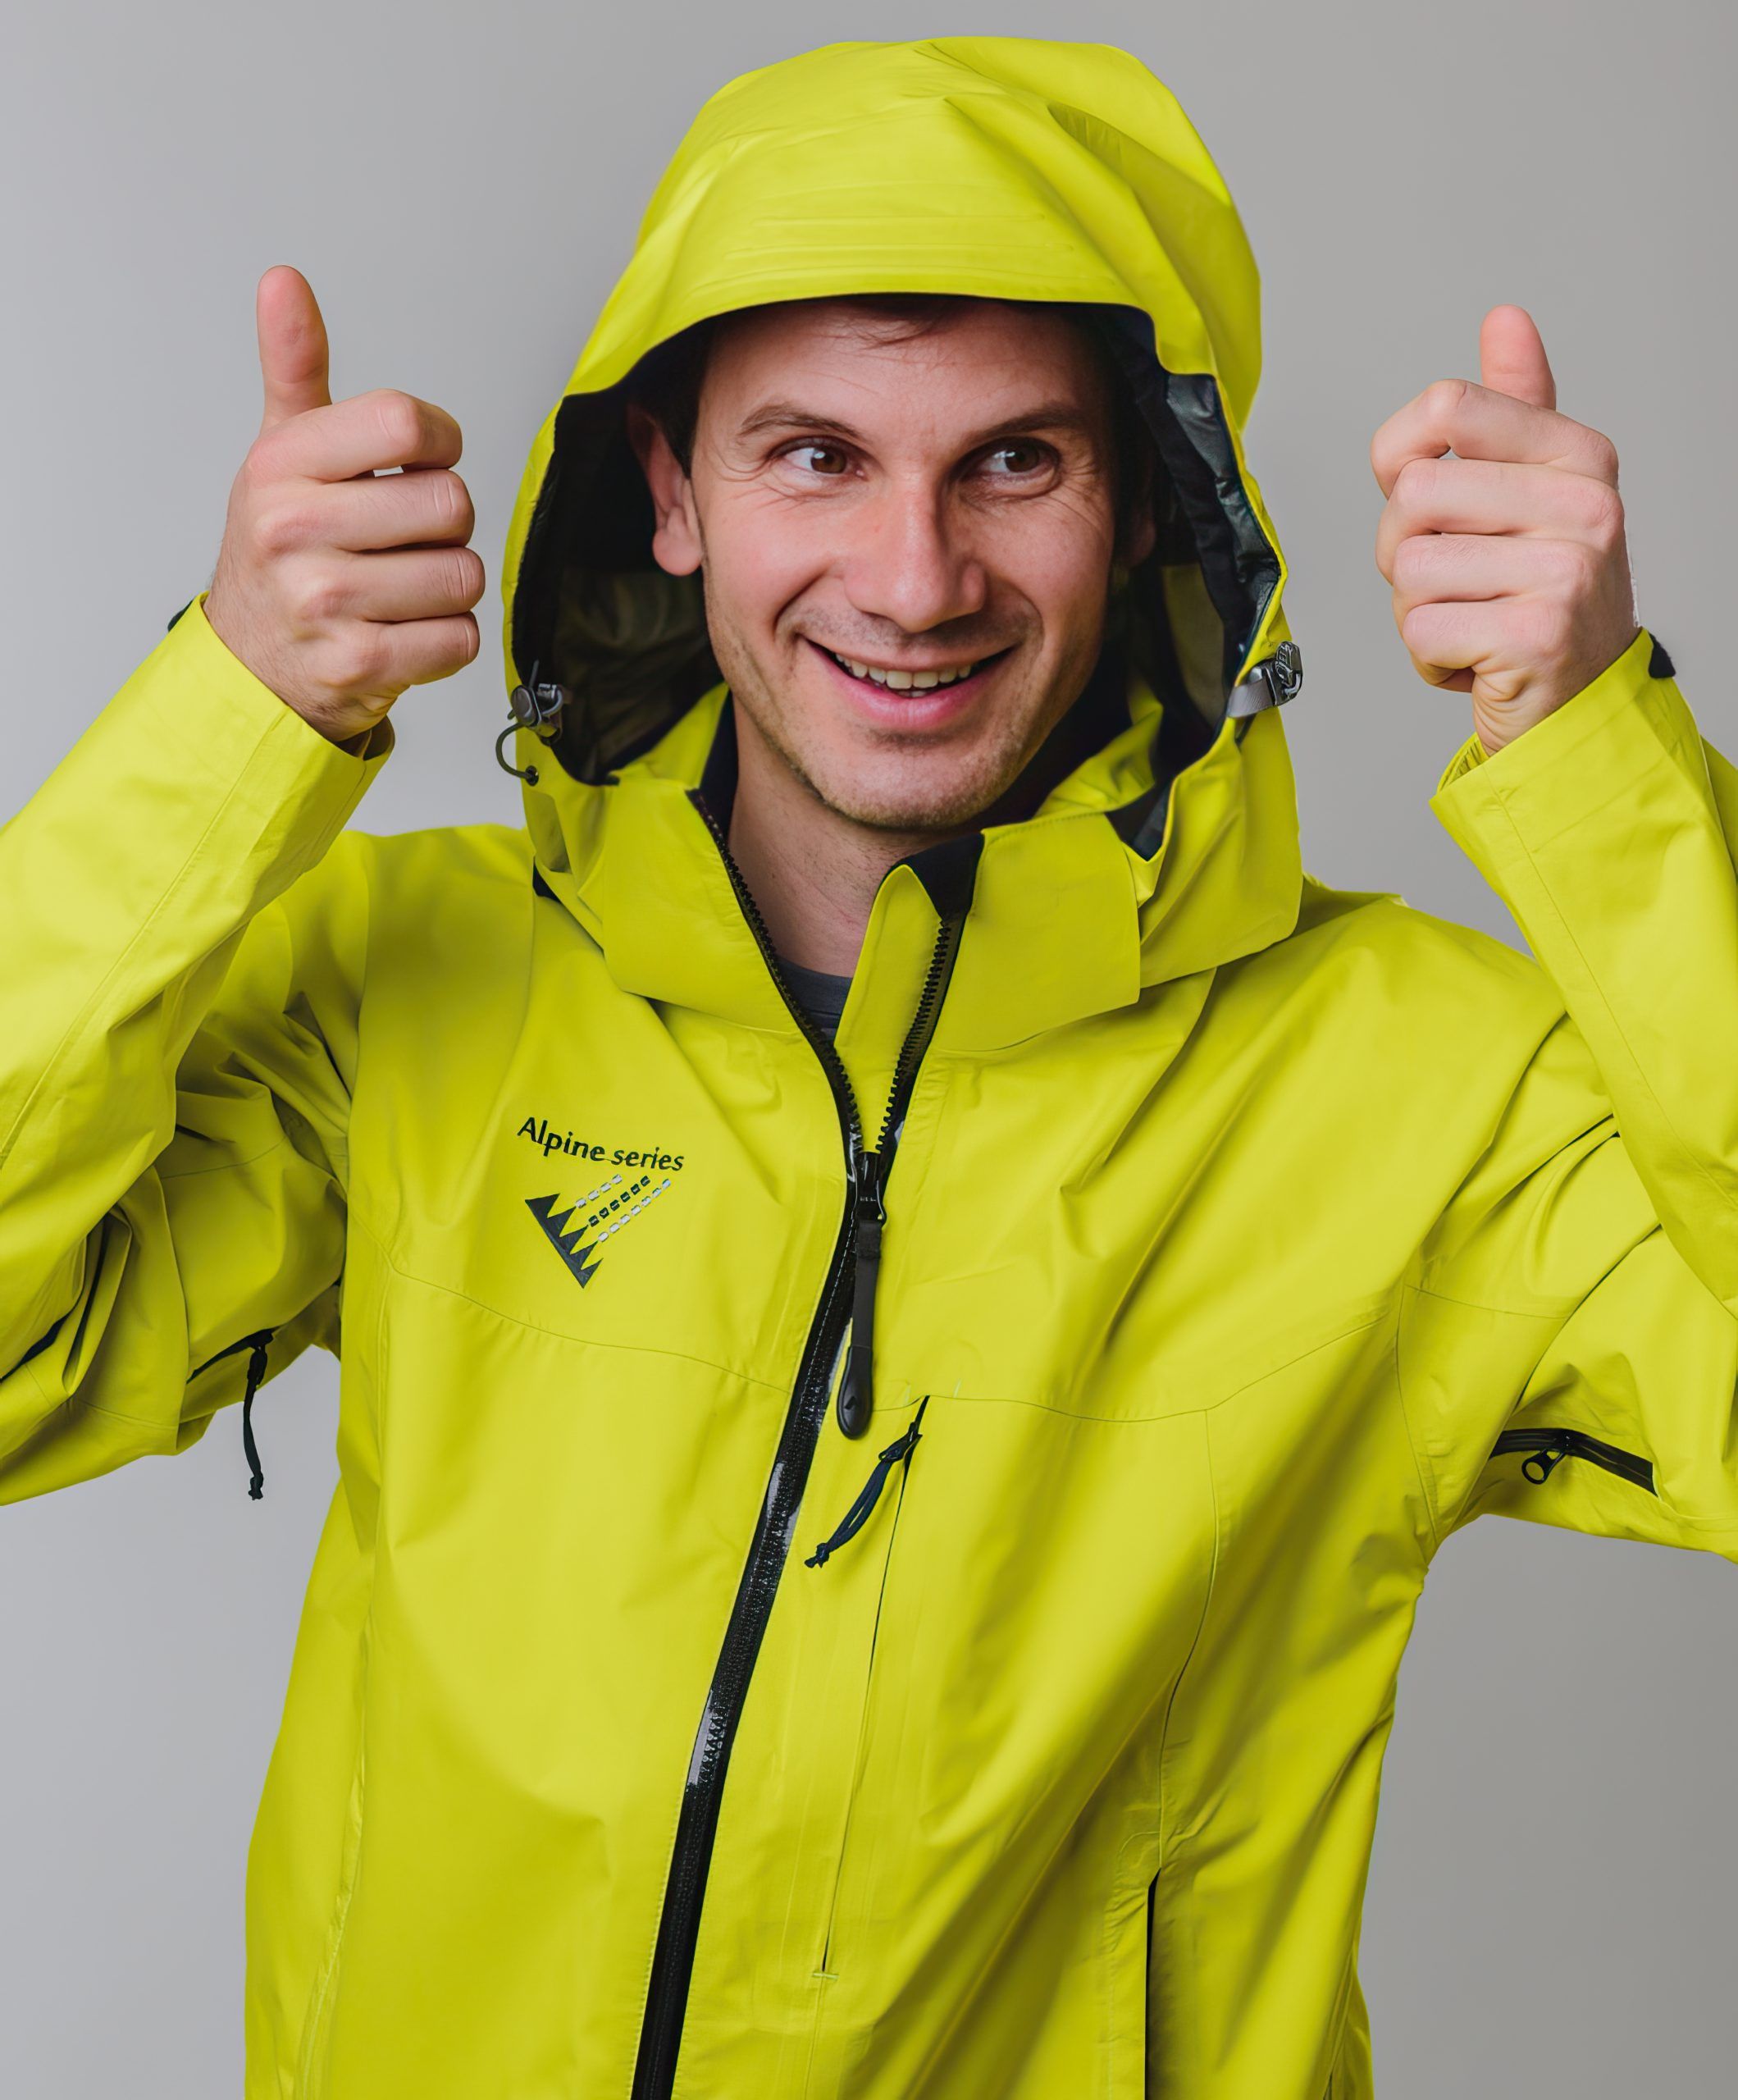 Ikal jacket hardshell yellow from MAYA MAYA is designed for extreme weather conditions for men in the outdoors